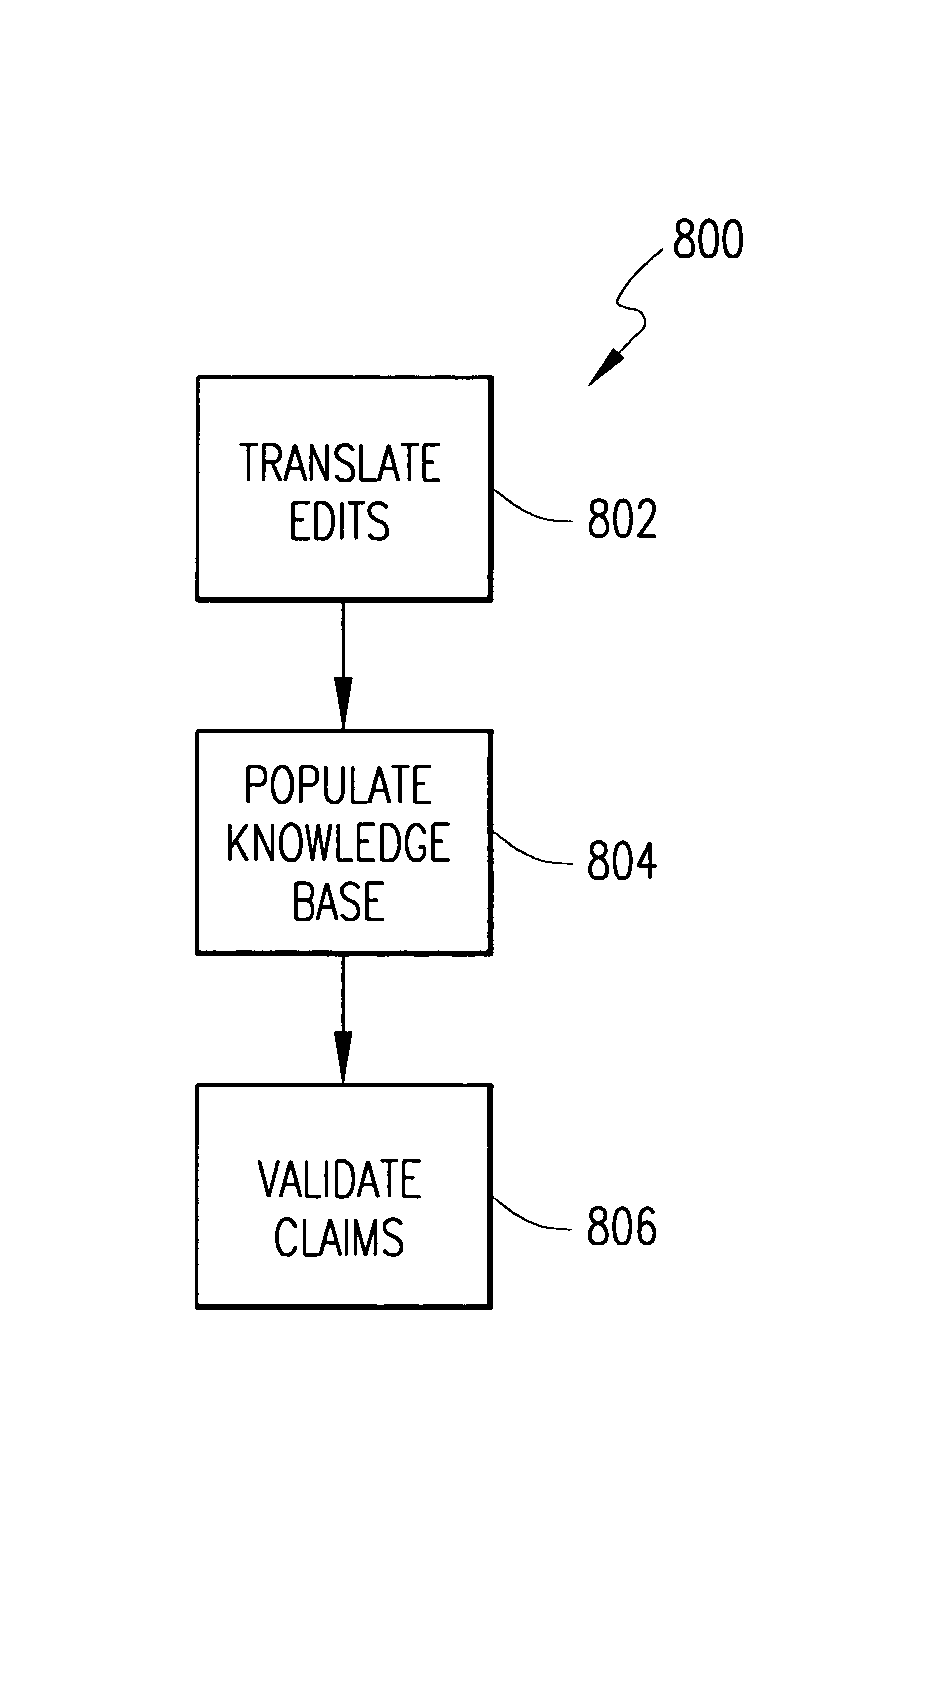 Method of and system for rules-based population of a knowledge base used for medical claims processing